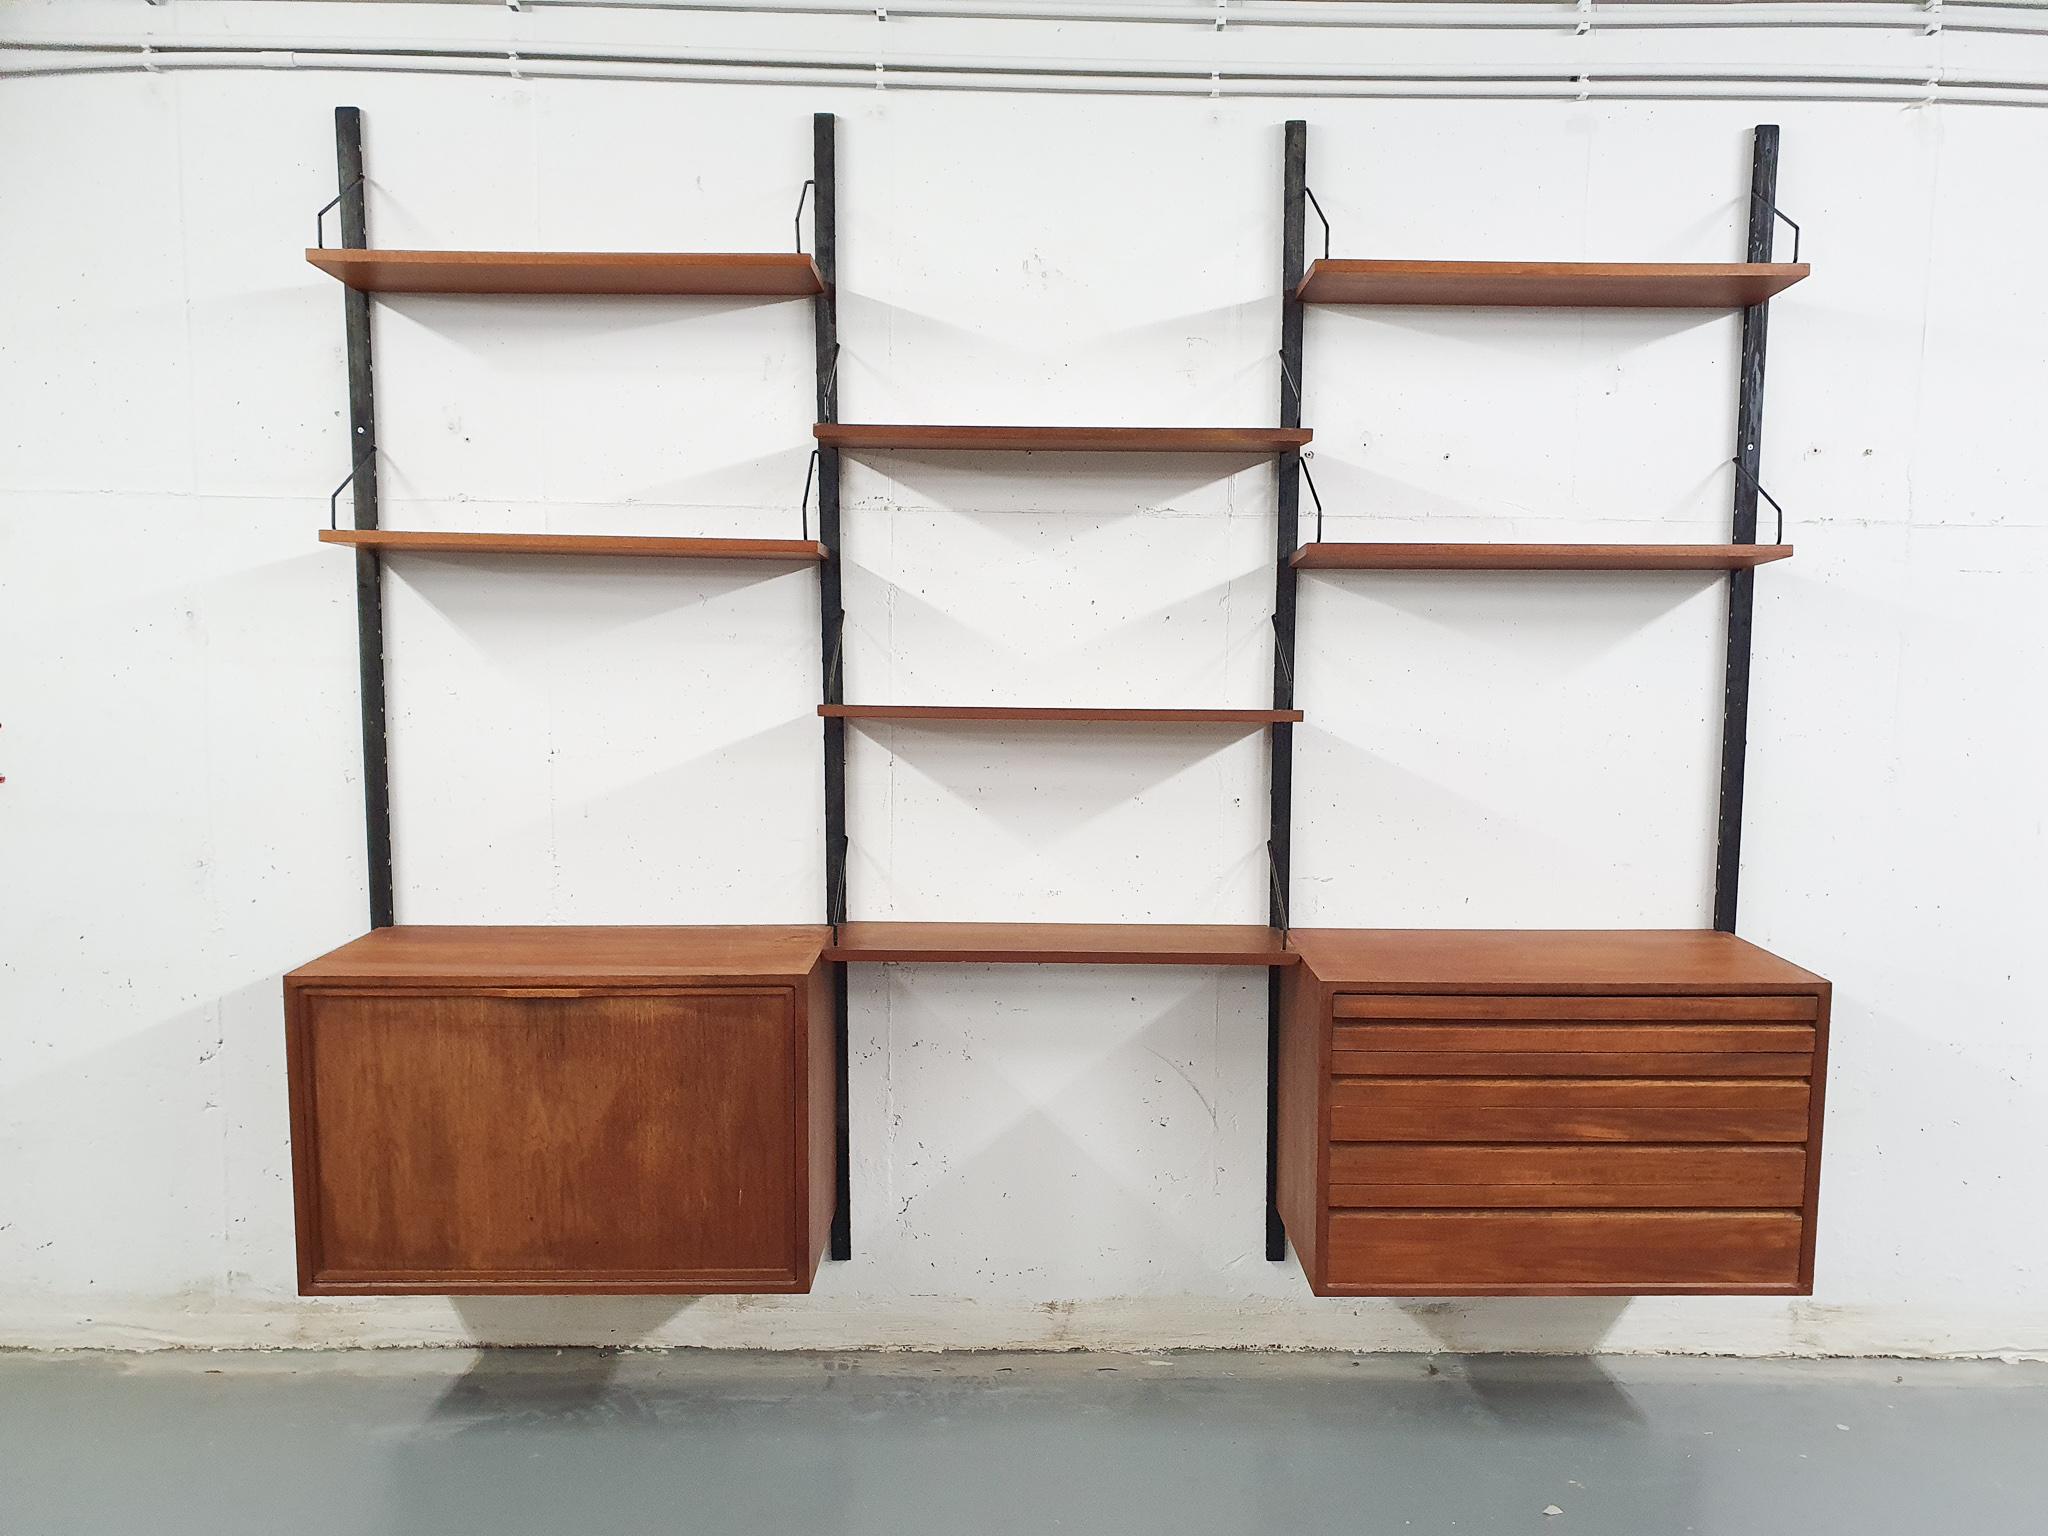 Black wooden risers and teak veneer book shelves and cabinet with black metal hooks.

The wooden risers are not original, we had them made by a carpenter.

This wall unit consist of:
4 x shelf: 80 x 20 cm
3 x shelf : 80 x 24 cm
2 x cabinet: